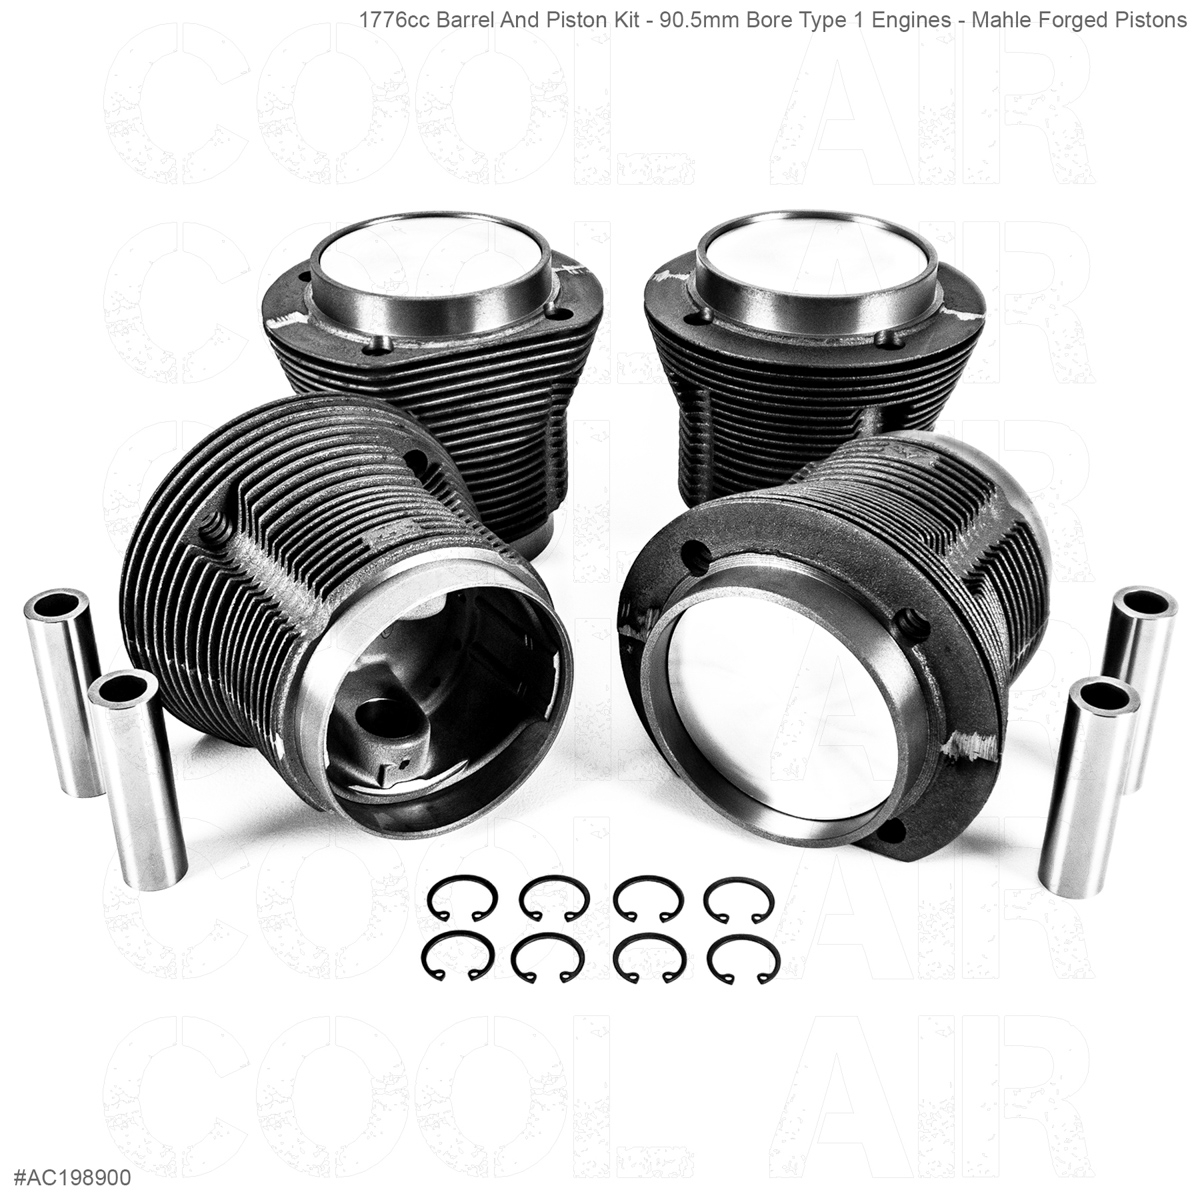 1776cc Barrel And Piston Kit - 90.5mm Bore Type 1 Engines - Mahle Forged Pistons